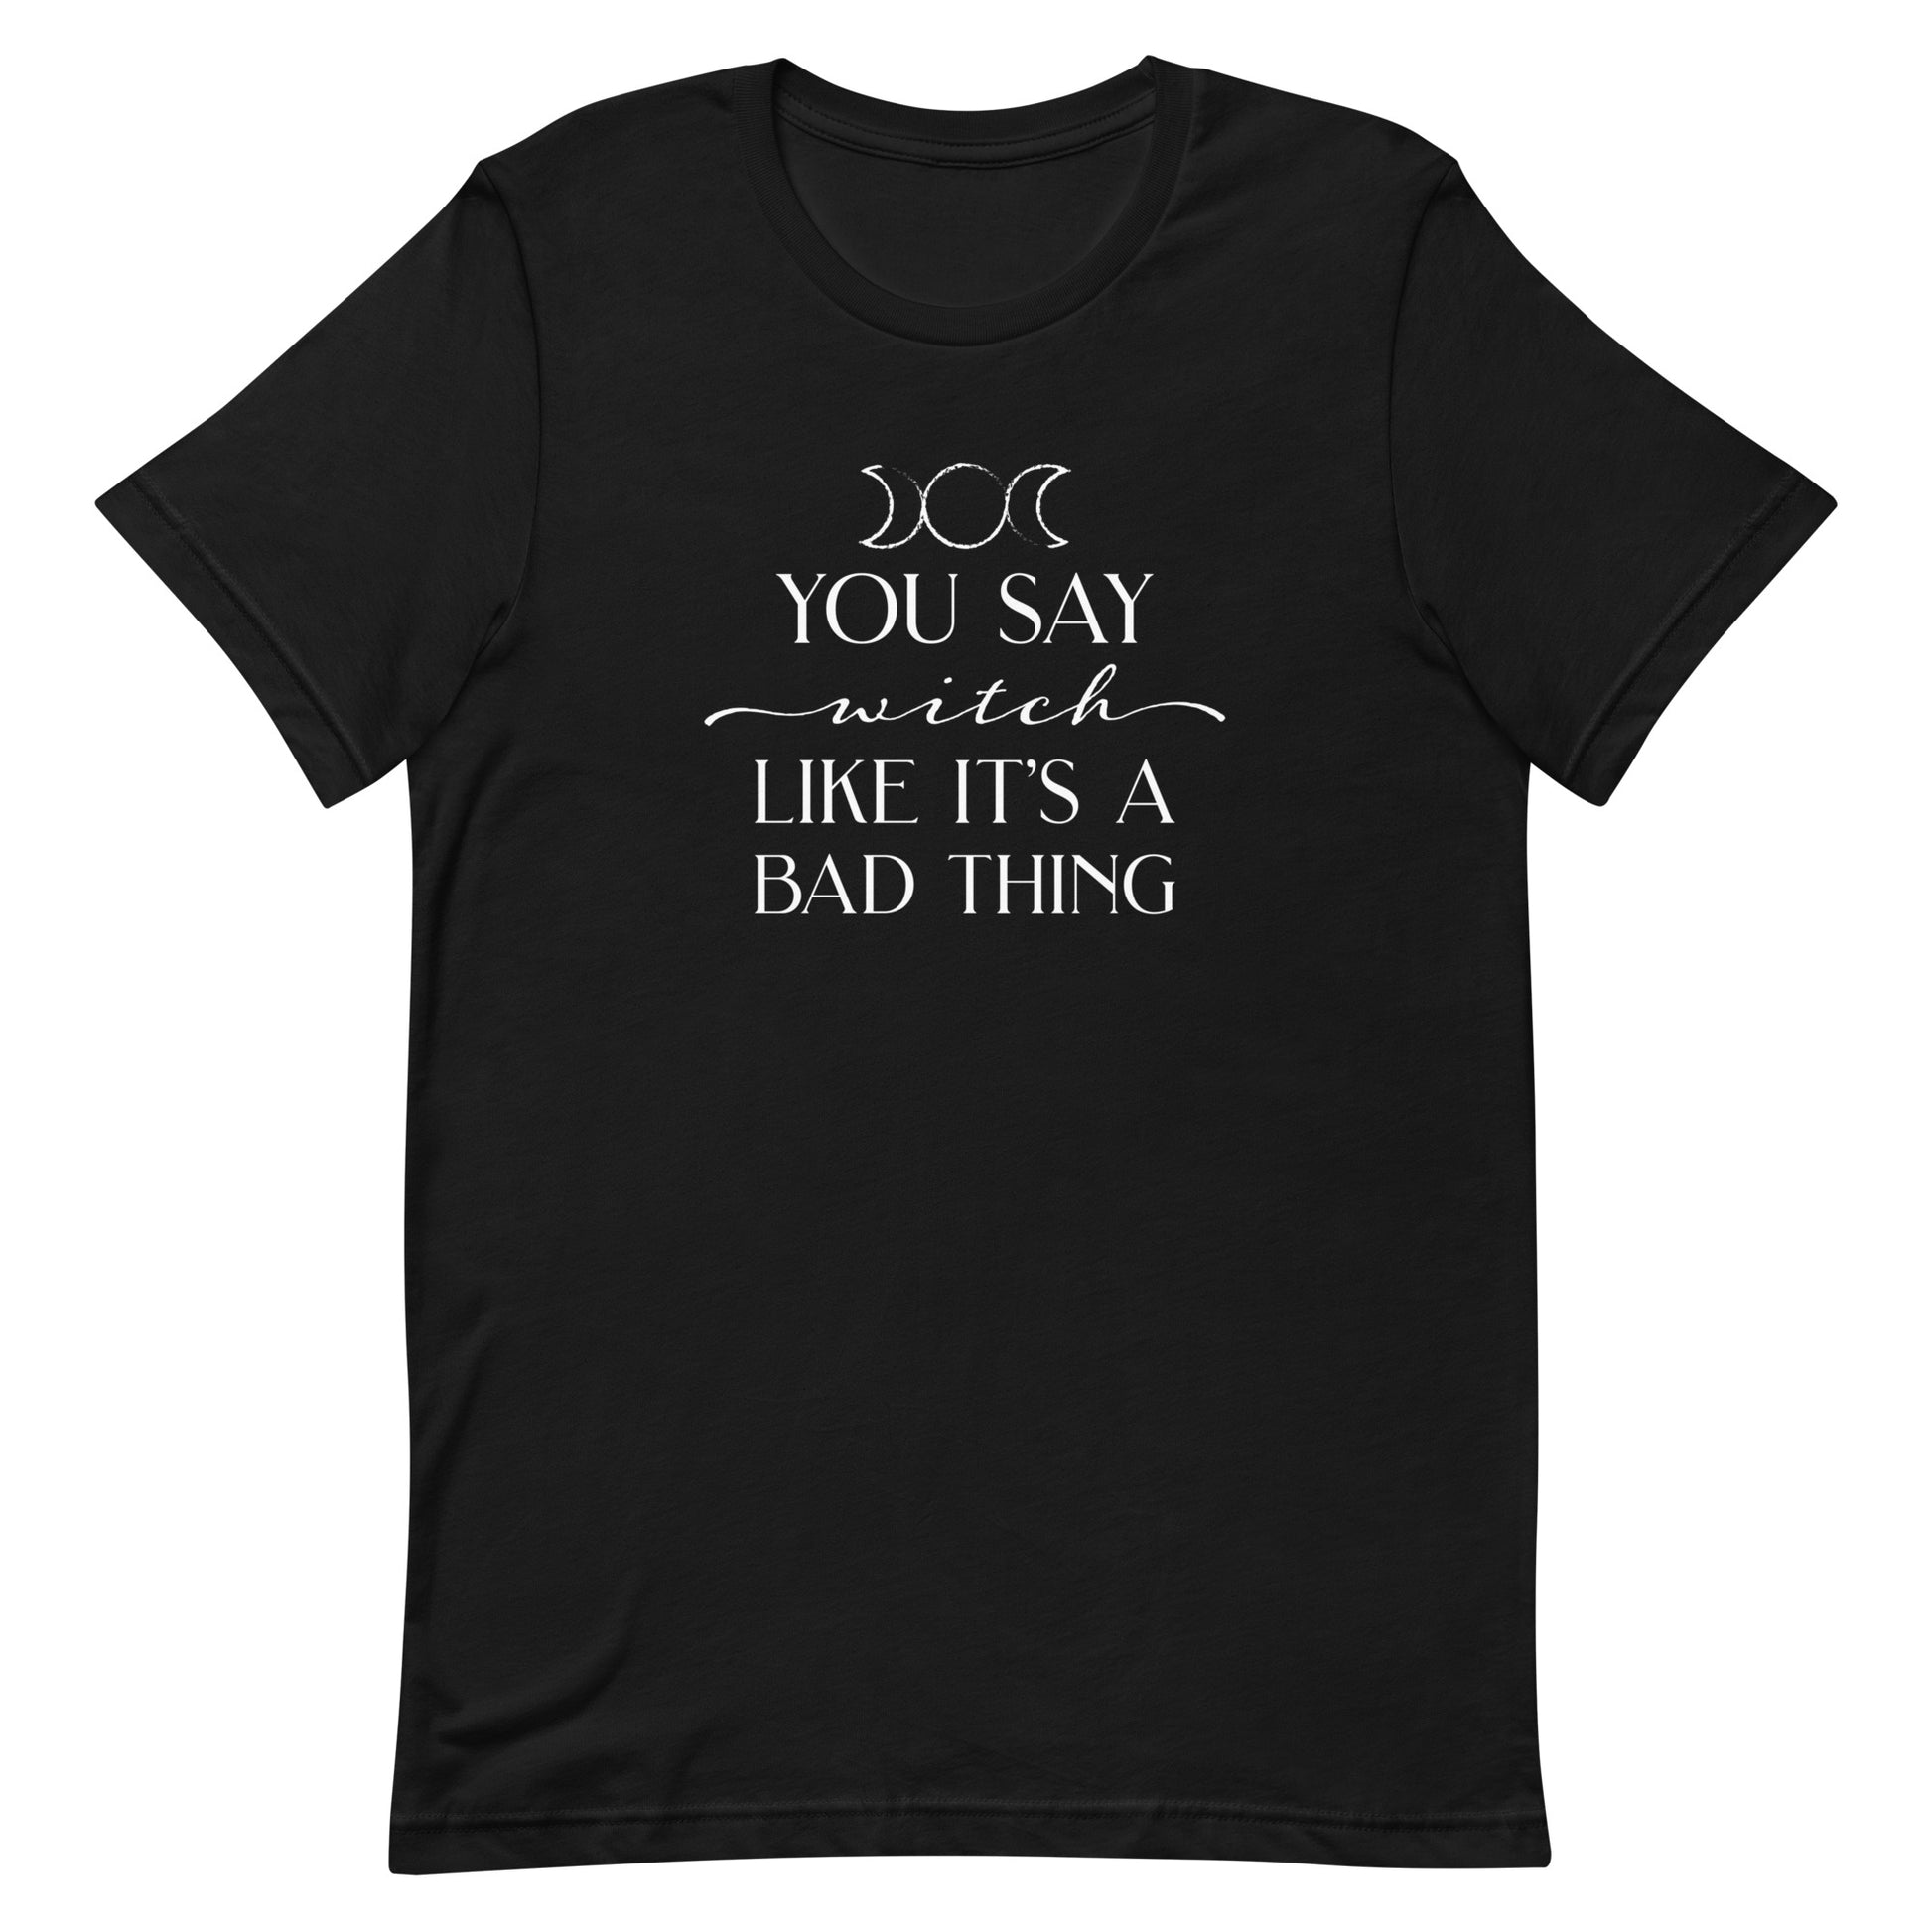 A black crewneck t-shirt featuring the triple goddess symbol and text reading "You say witch like it's a bad thing"